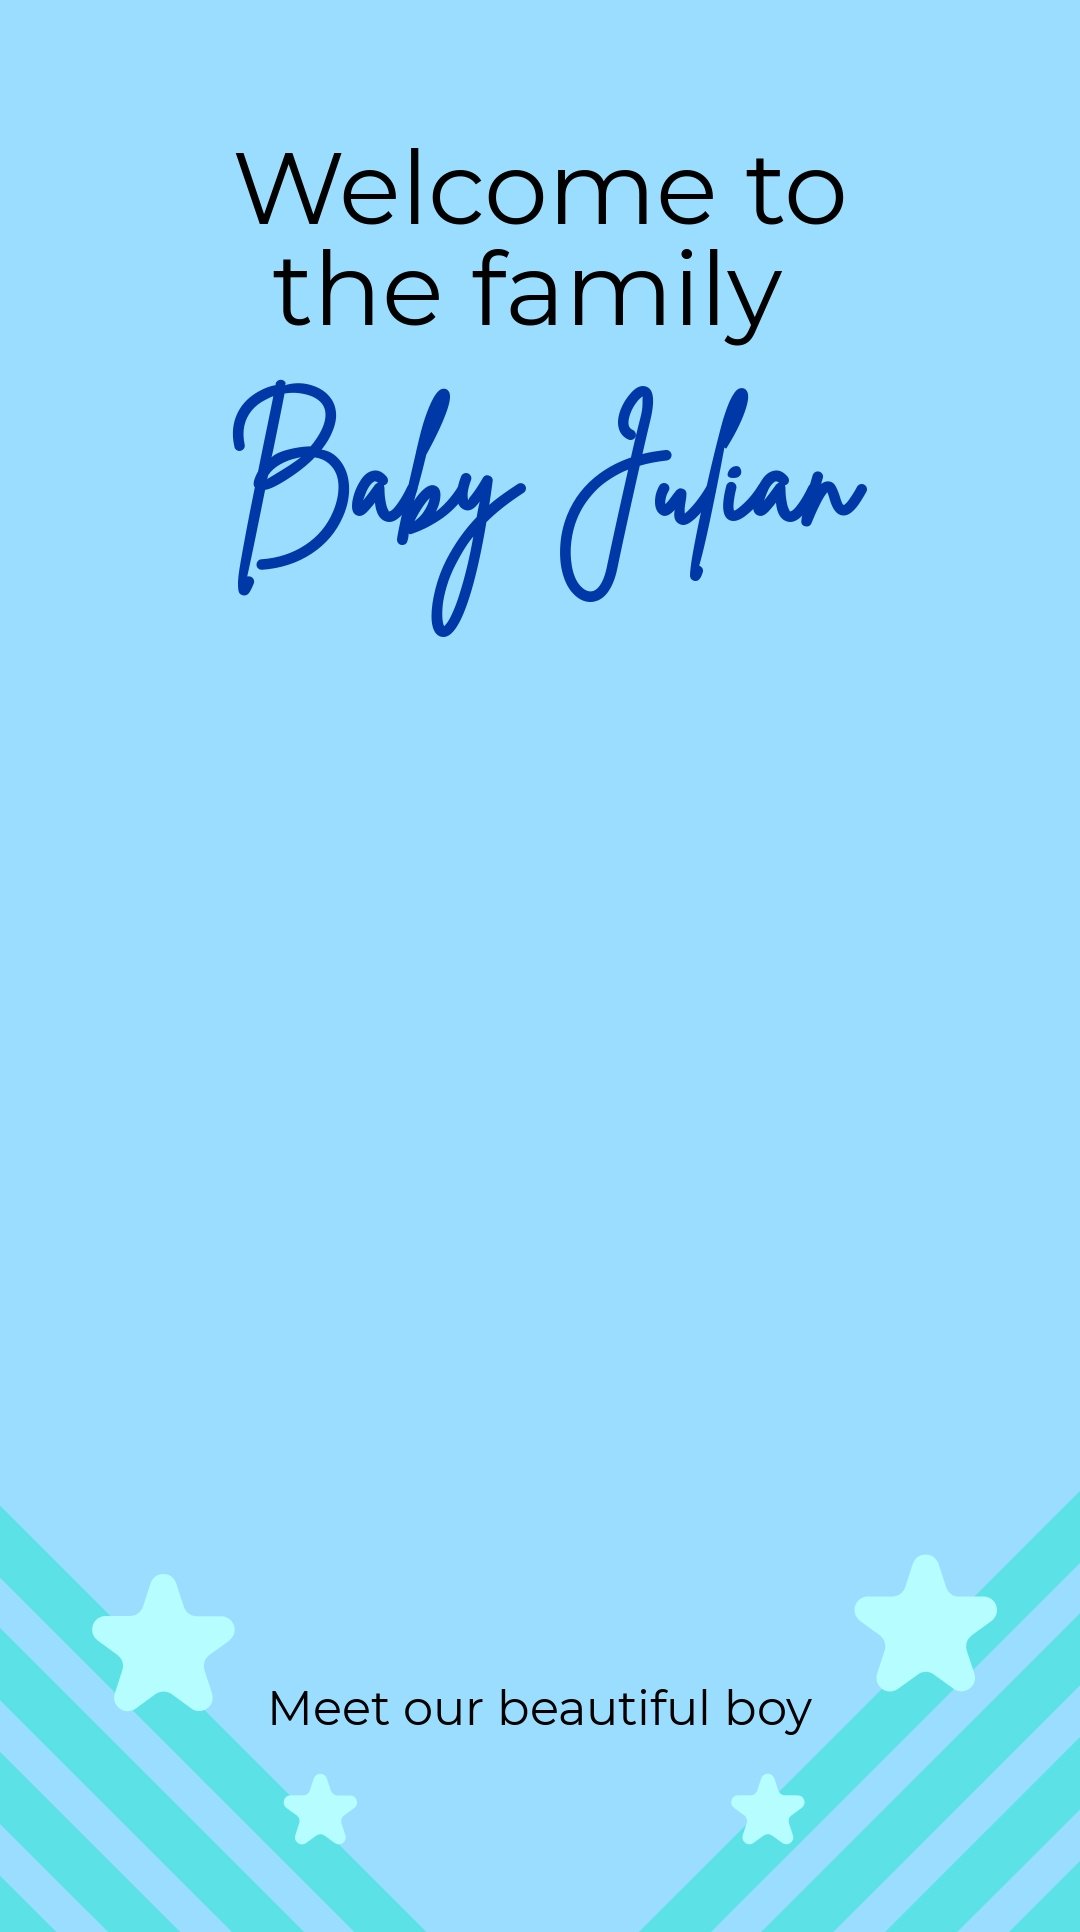 Free Baby Announcement Photo Snapchat Geofilter Template